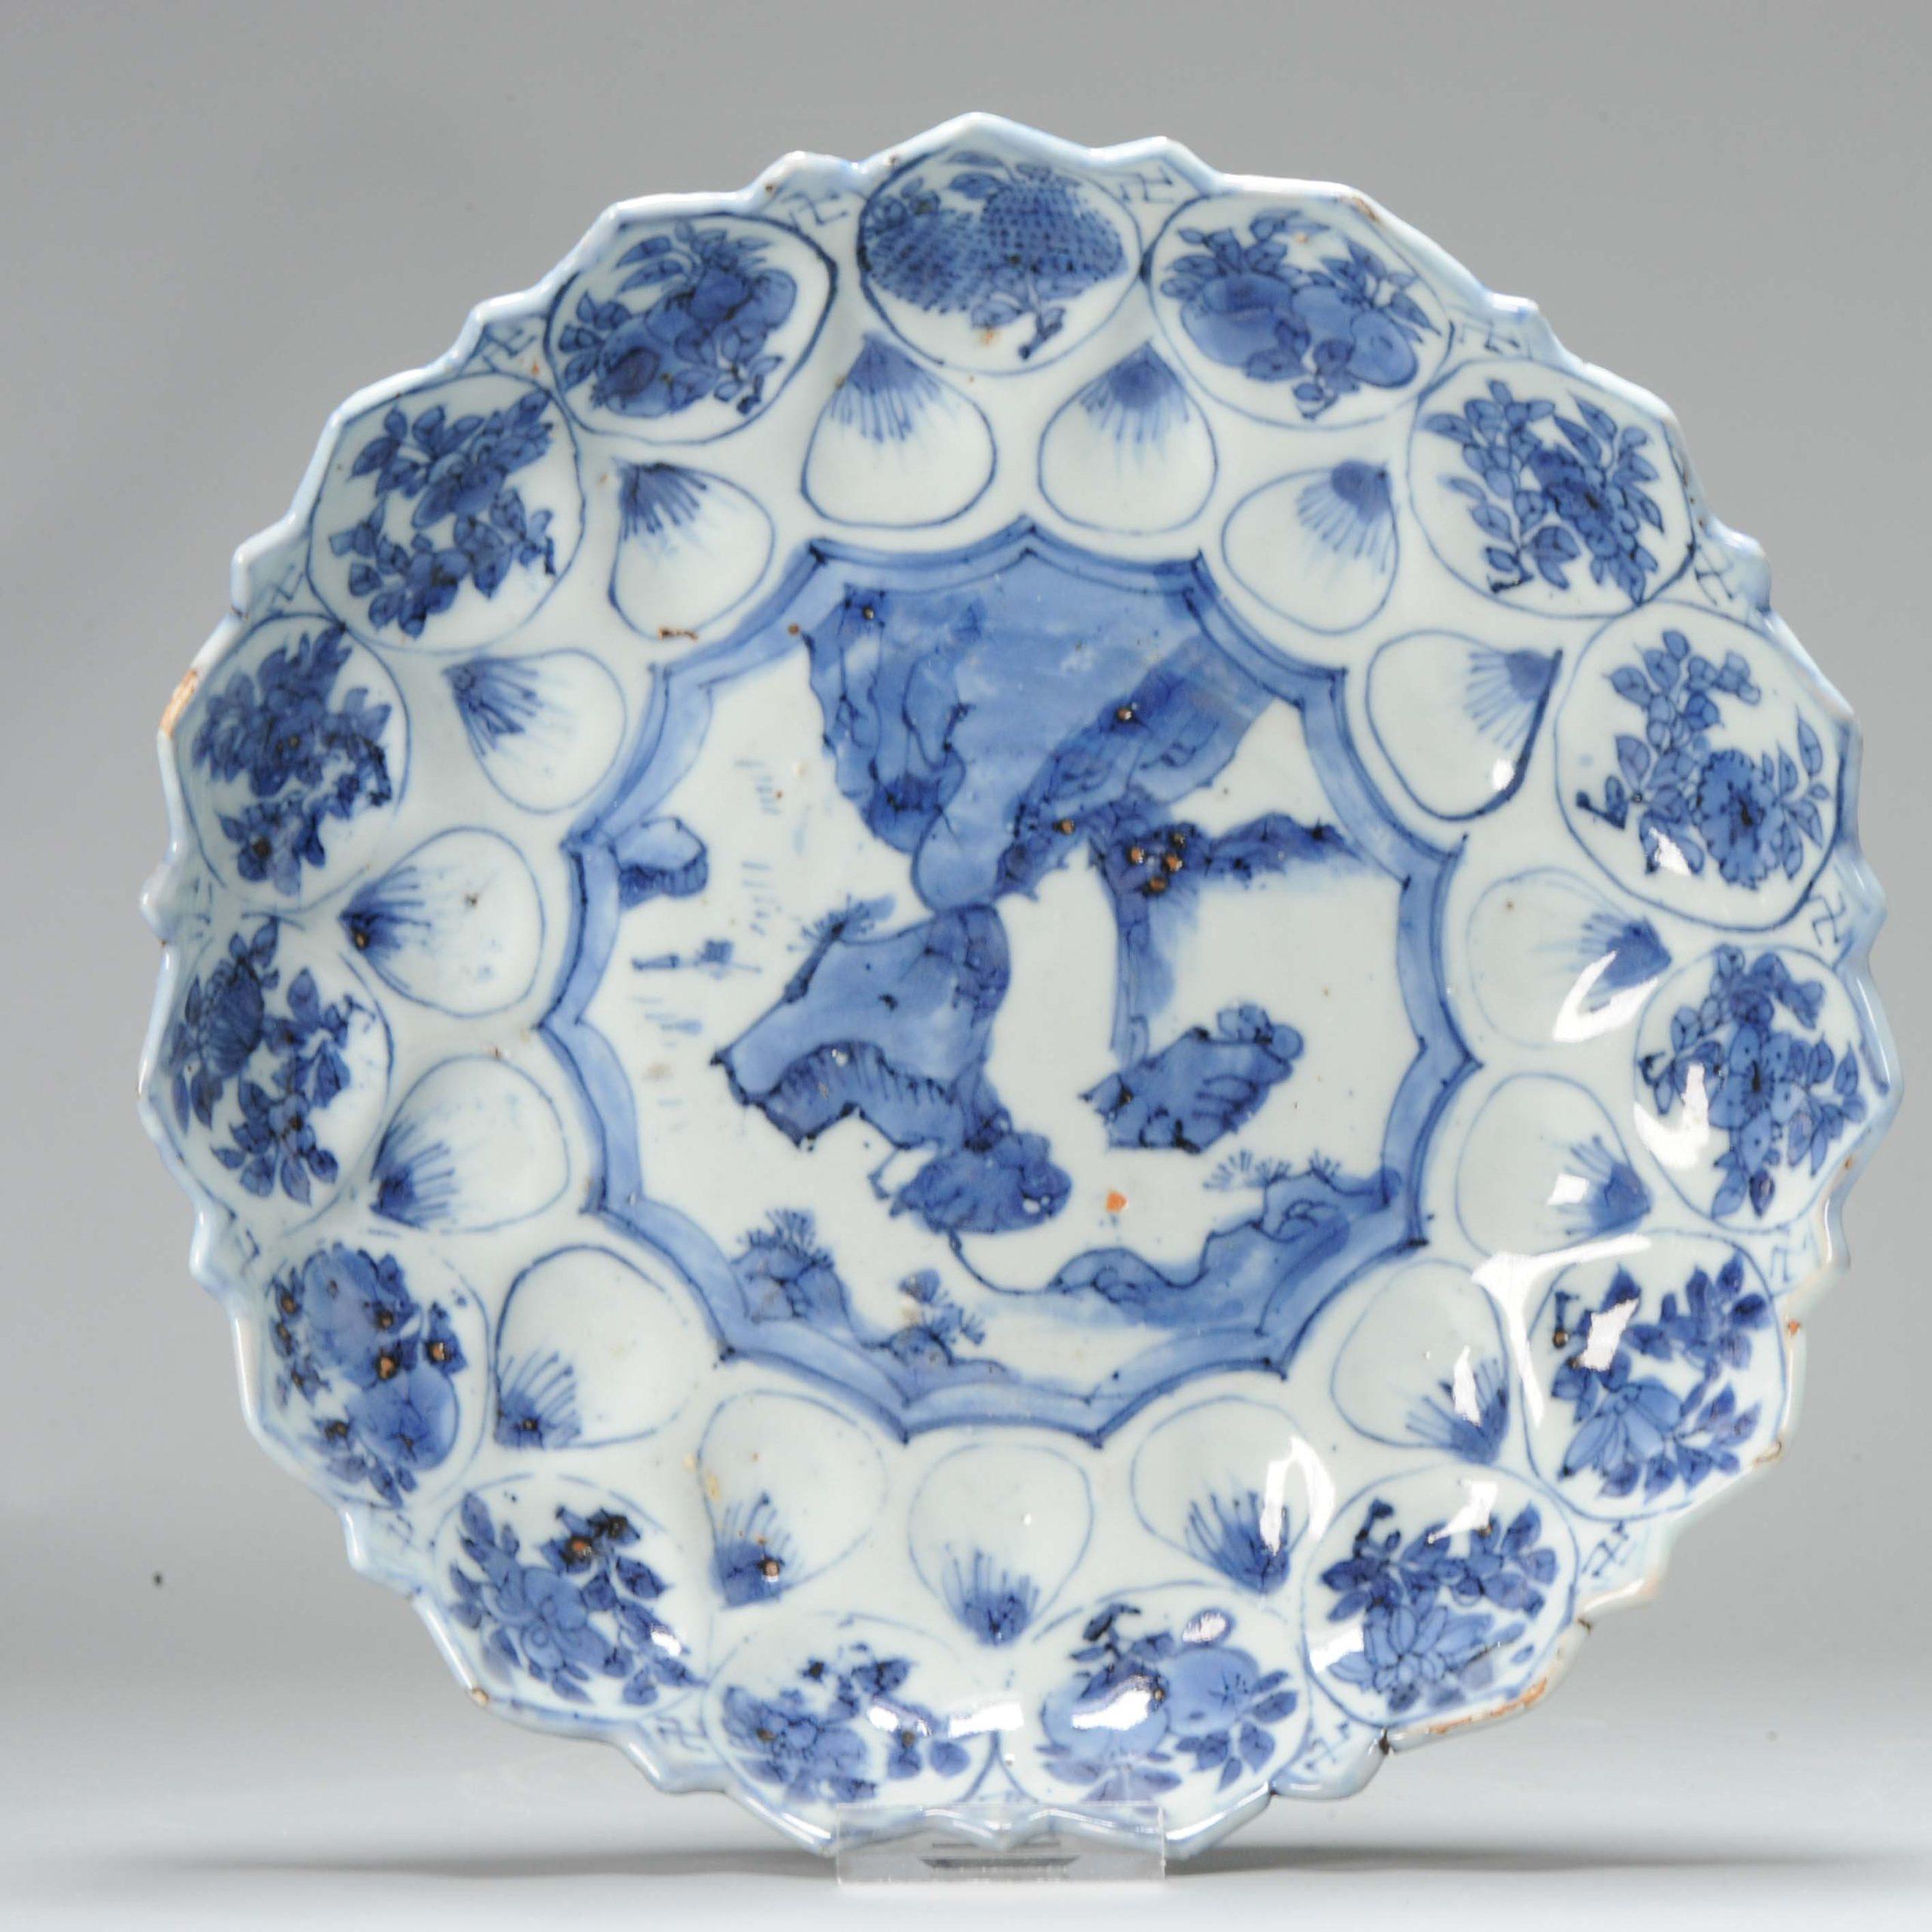 Beautiful dish in blue and white. This is a Jingdezhen made dish made for the Japanese market. Kosometsuke.

The rim of the dish is in the shape of a flower, the dis is overall shaped in the form of a flower also. Central scene of a rocky